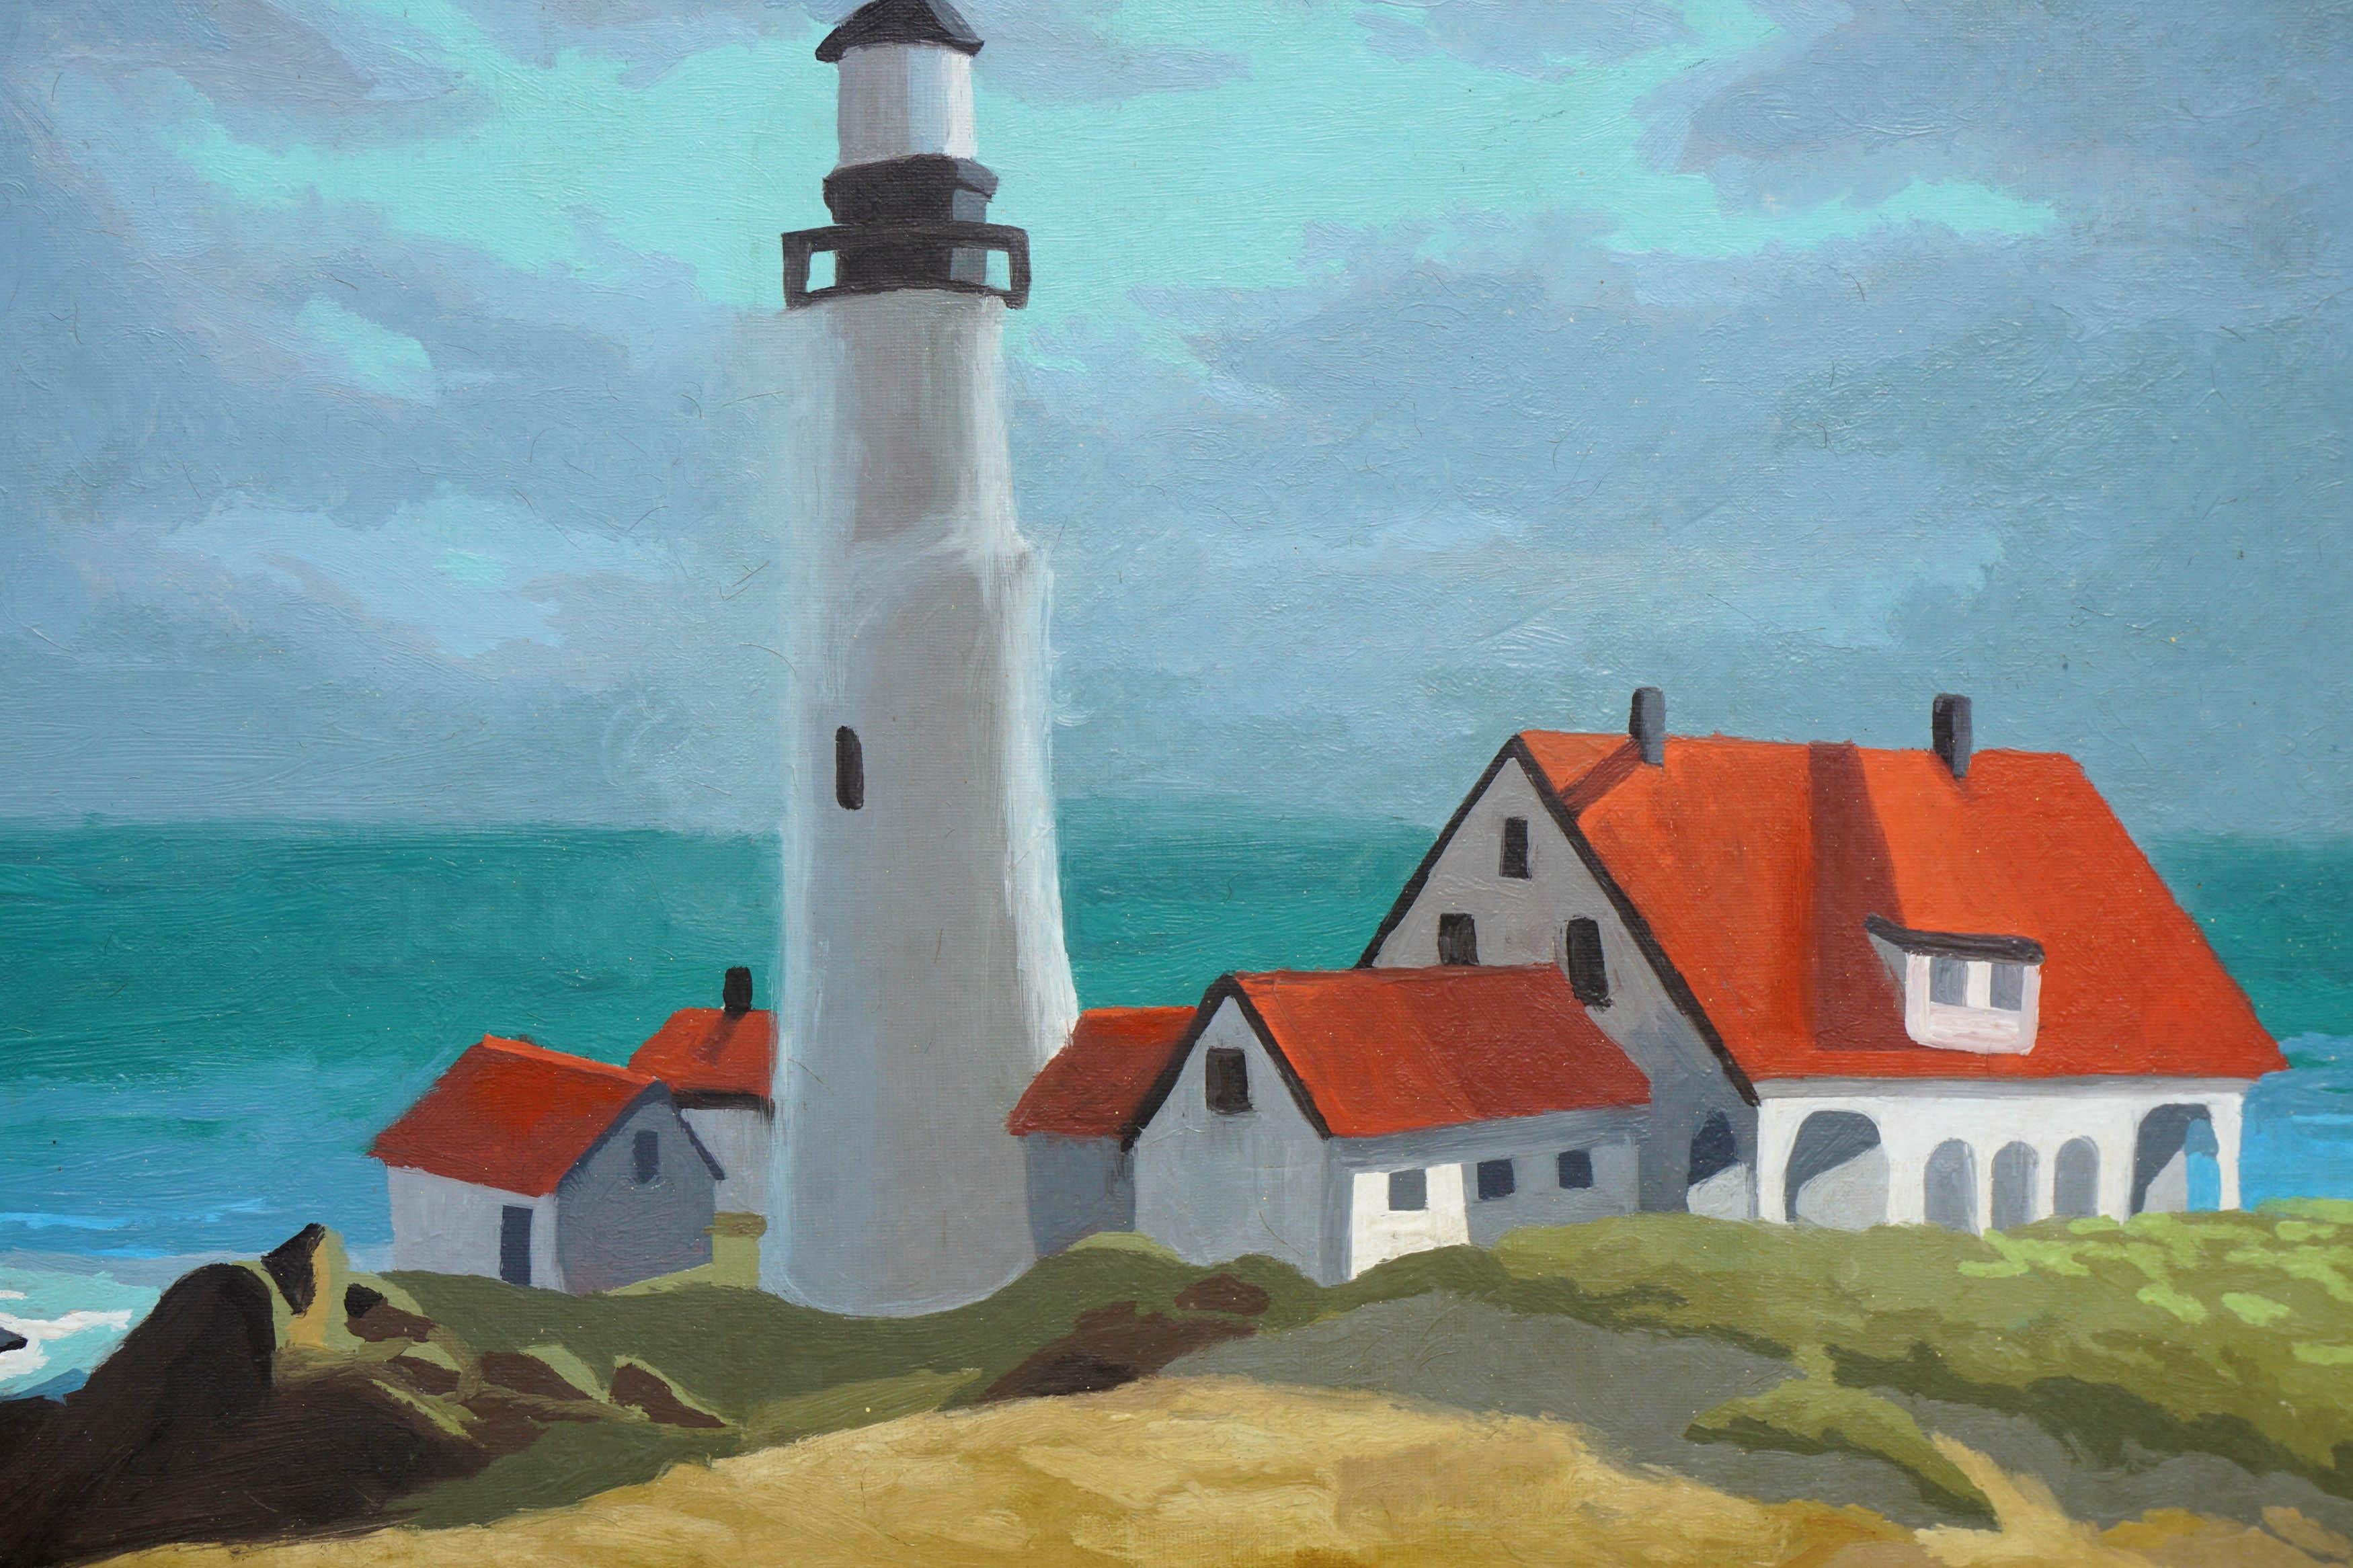 Portland Head Lighthouse, Maine - Painting by G. Story